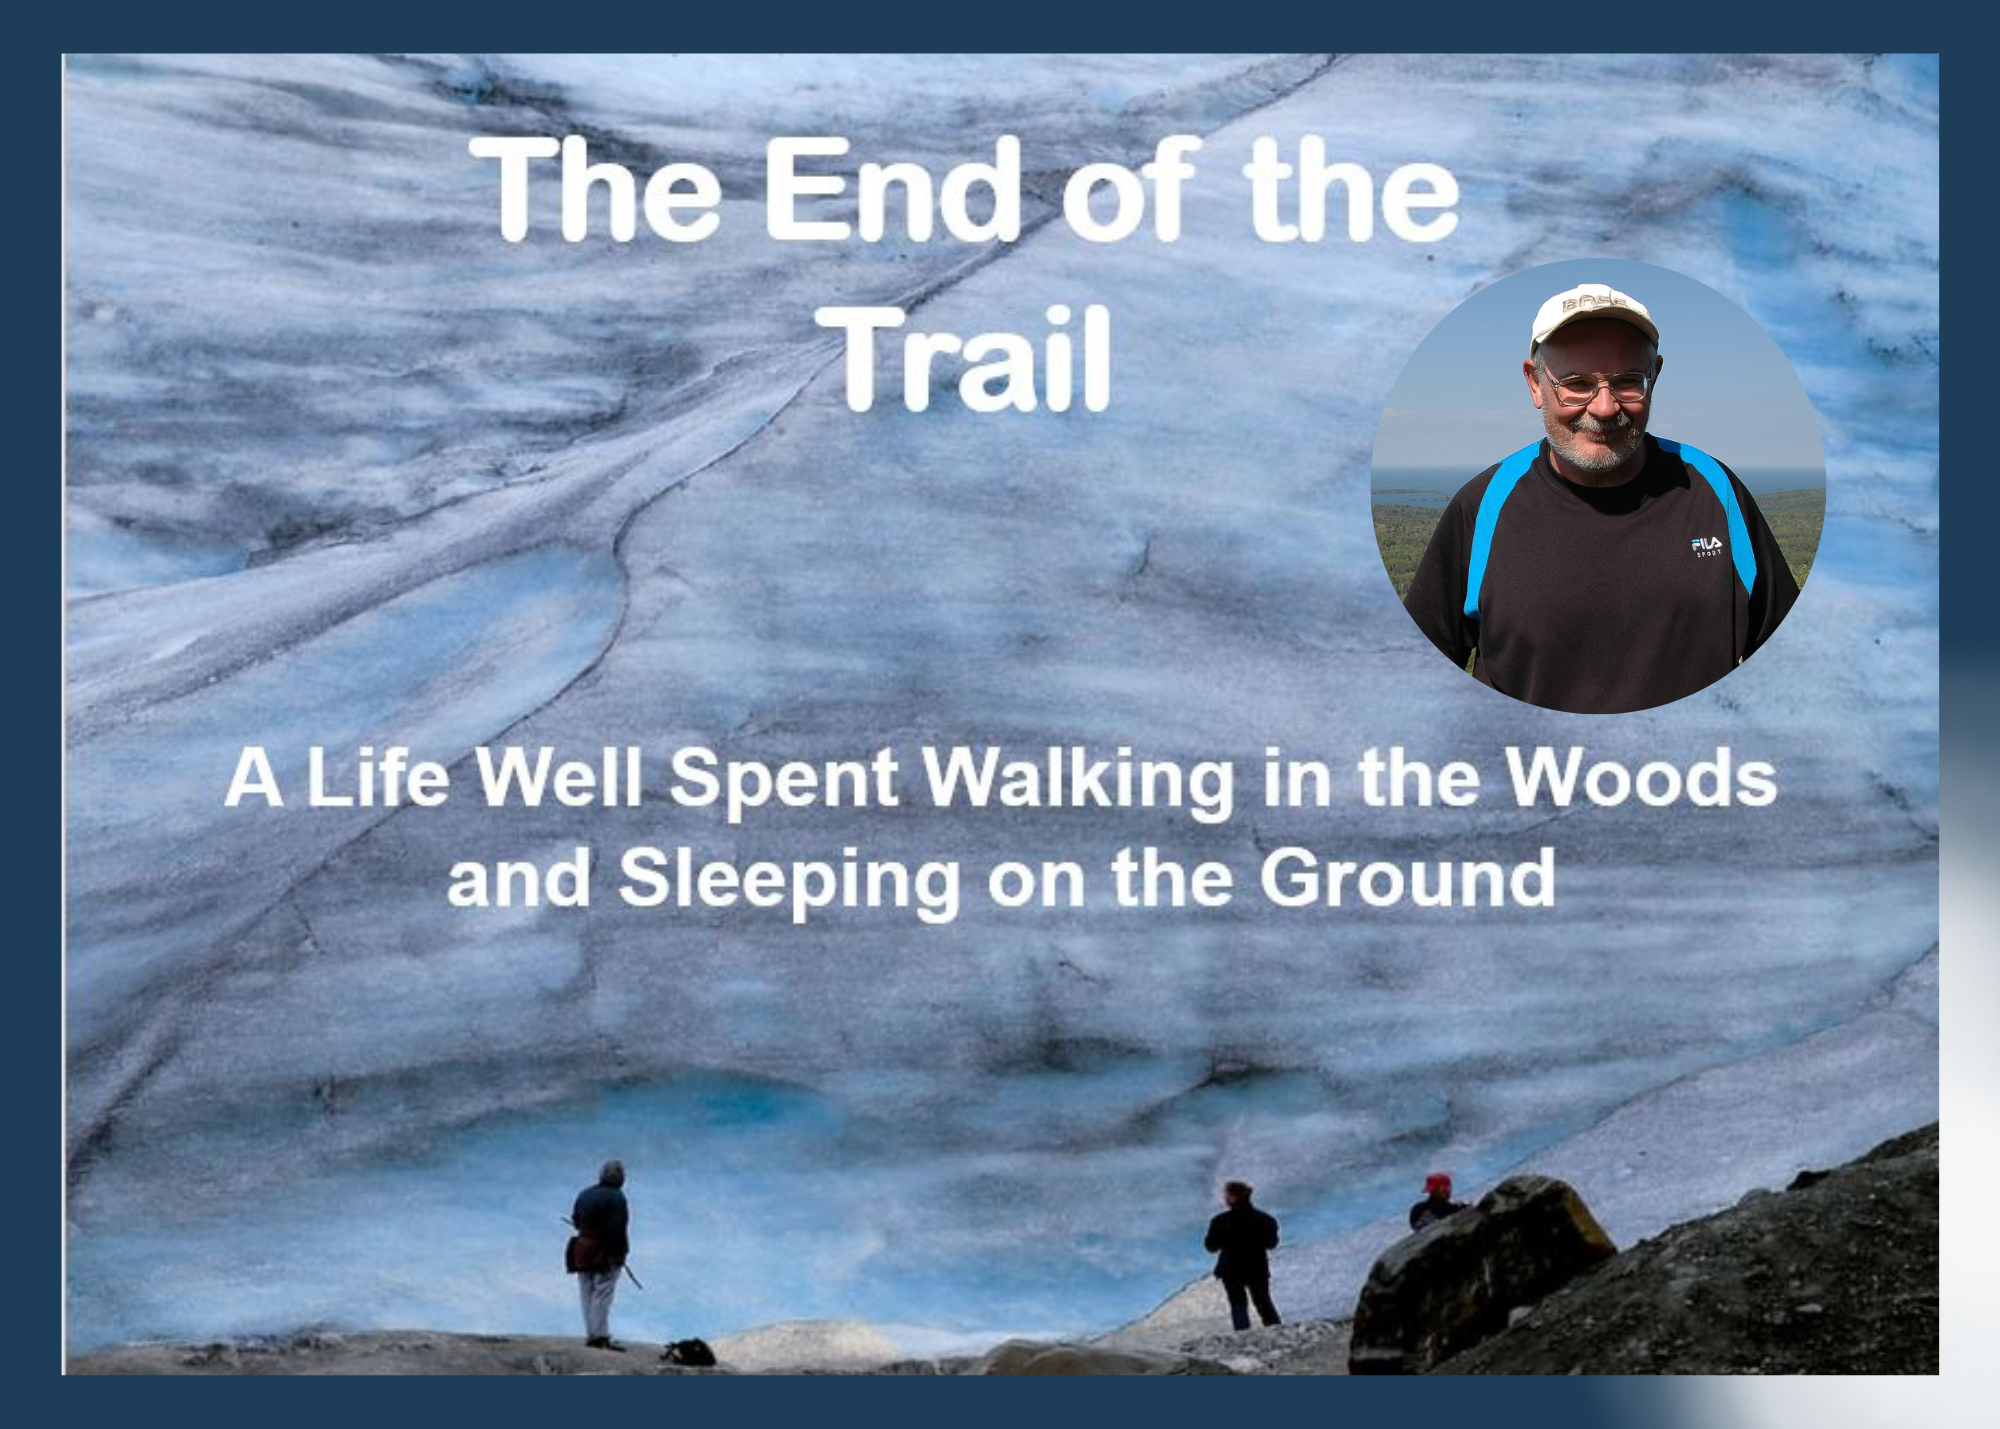 Photo of a trail image and author Jim DuFresne